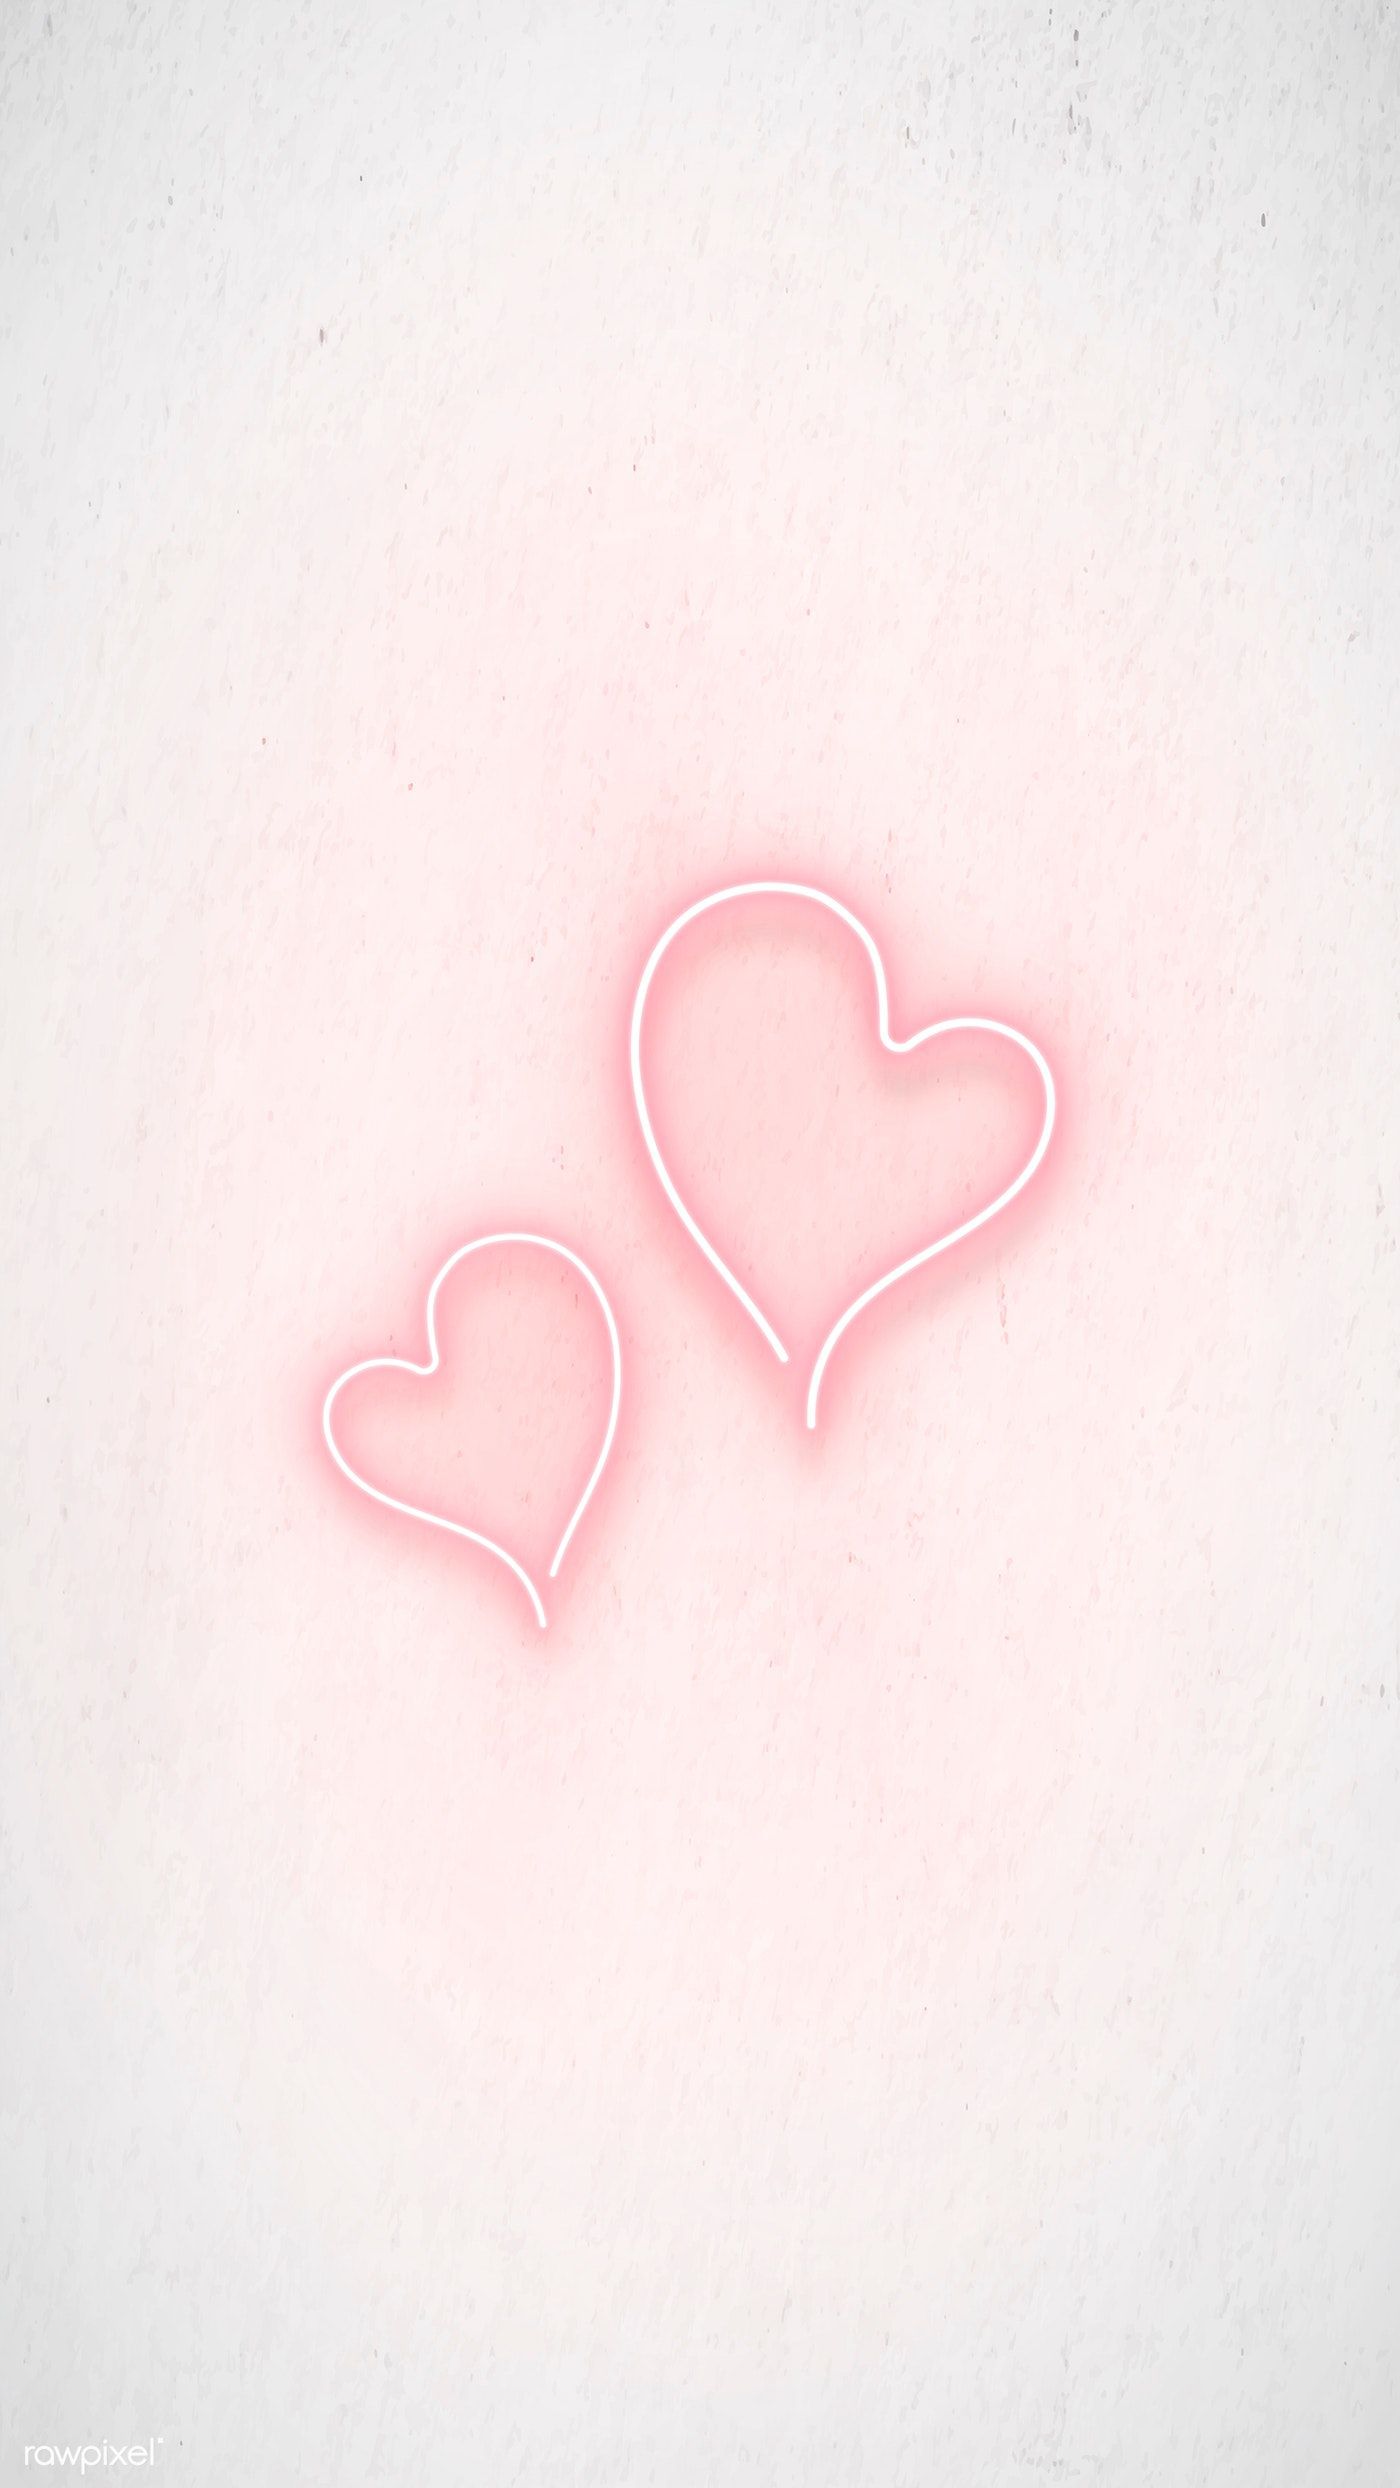 25 Outstanding iphone pink aesthetic wallpaper heart You Can Use It For ...